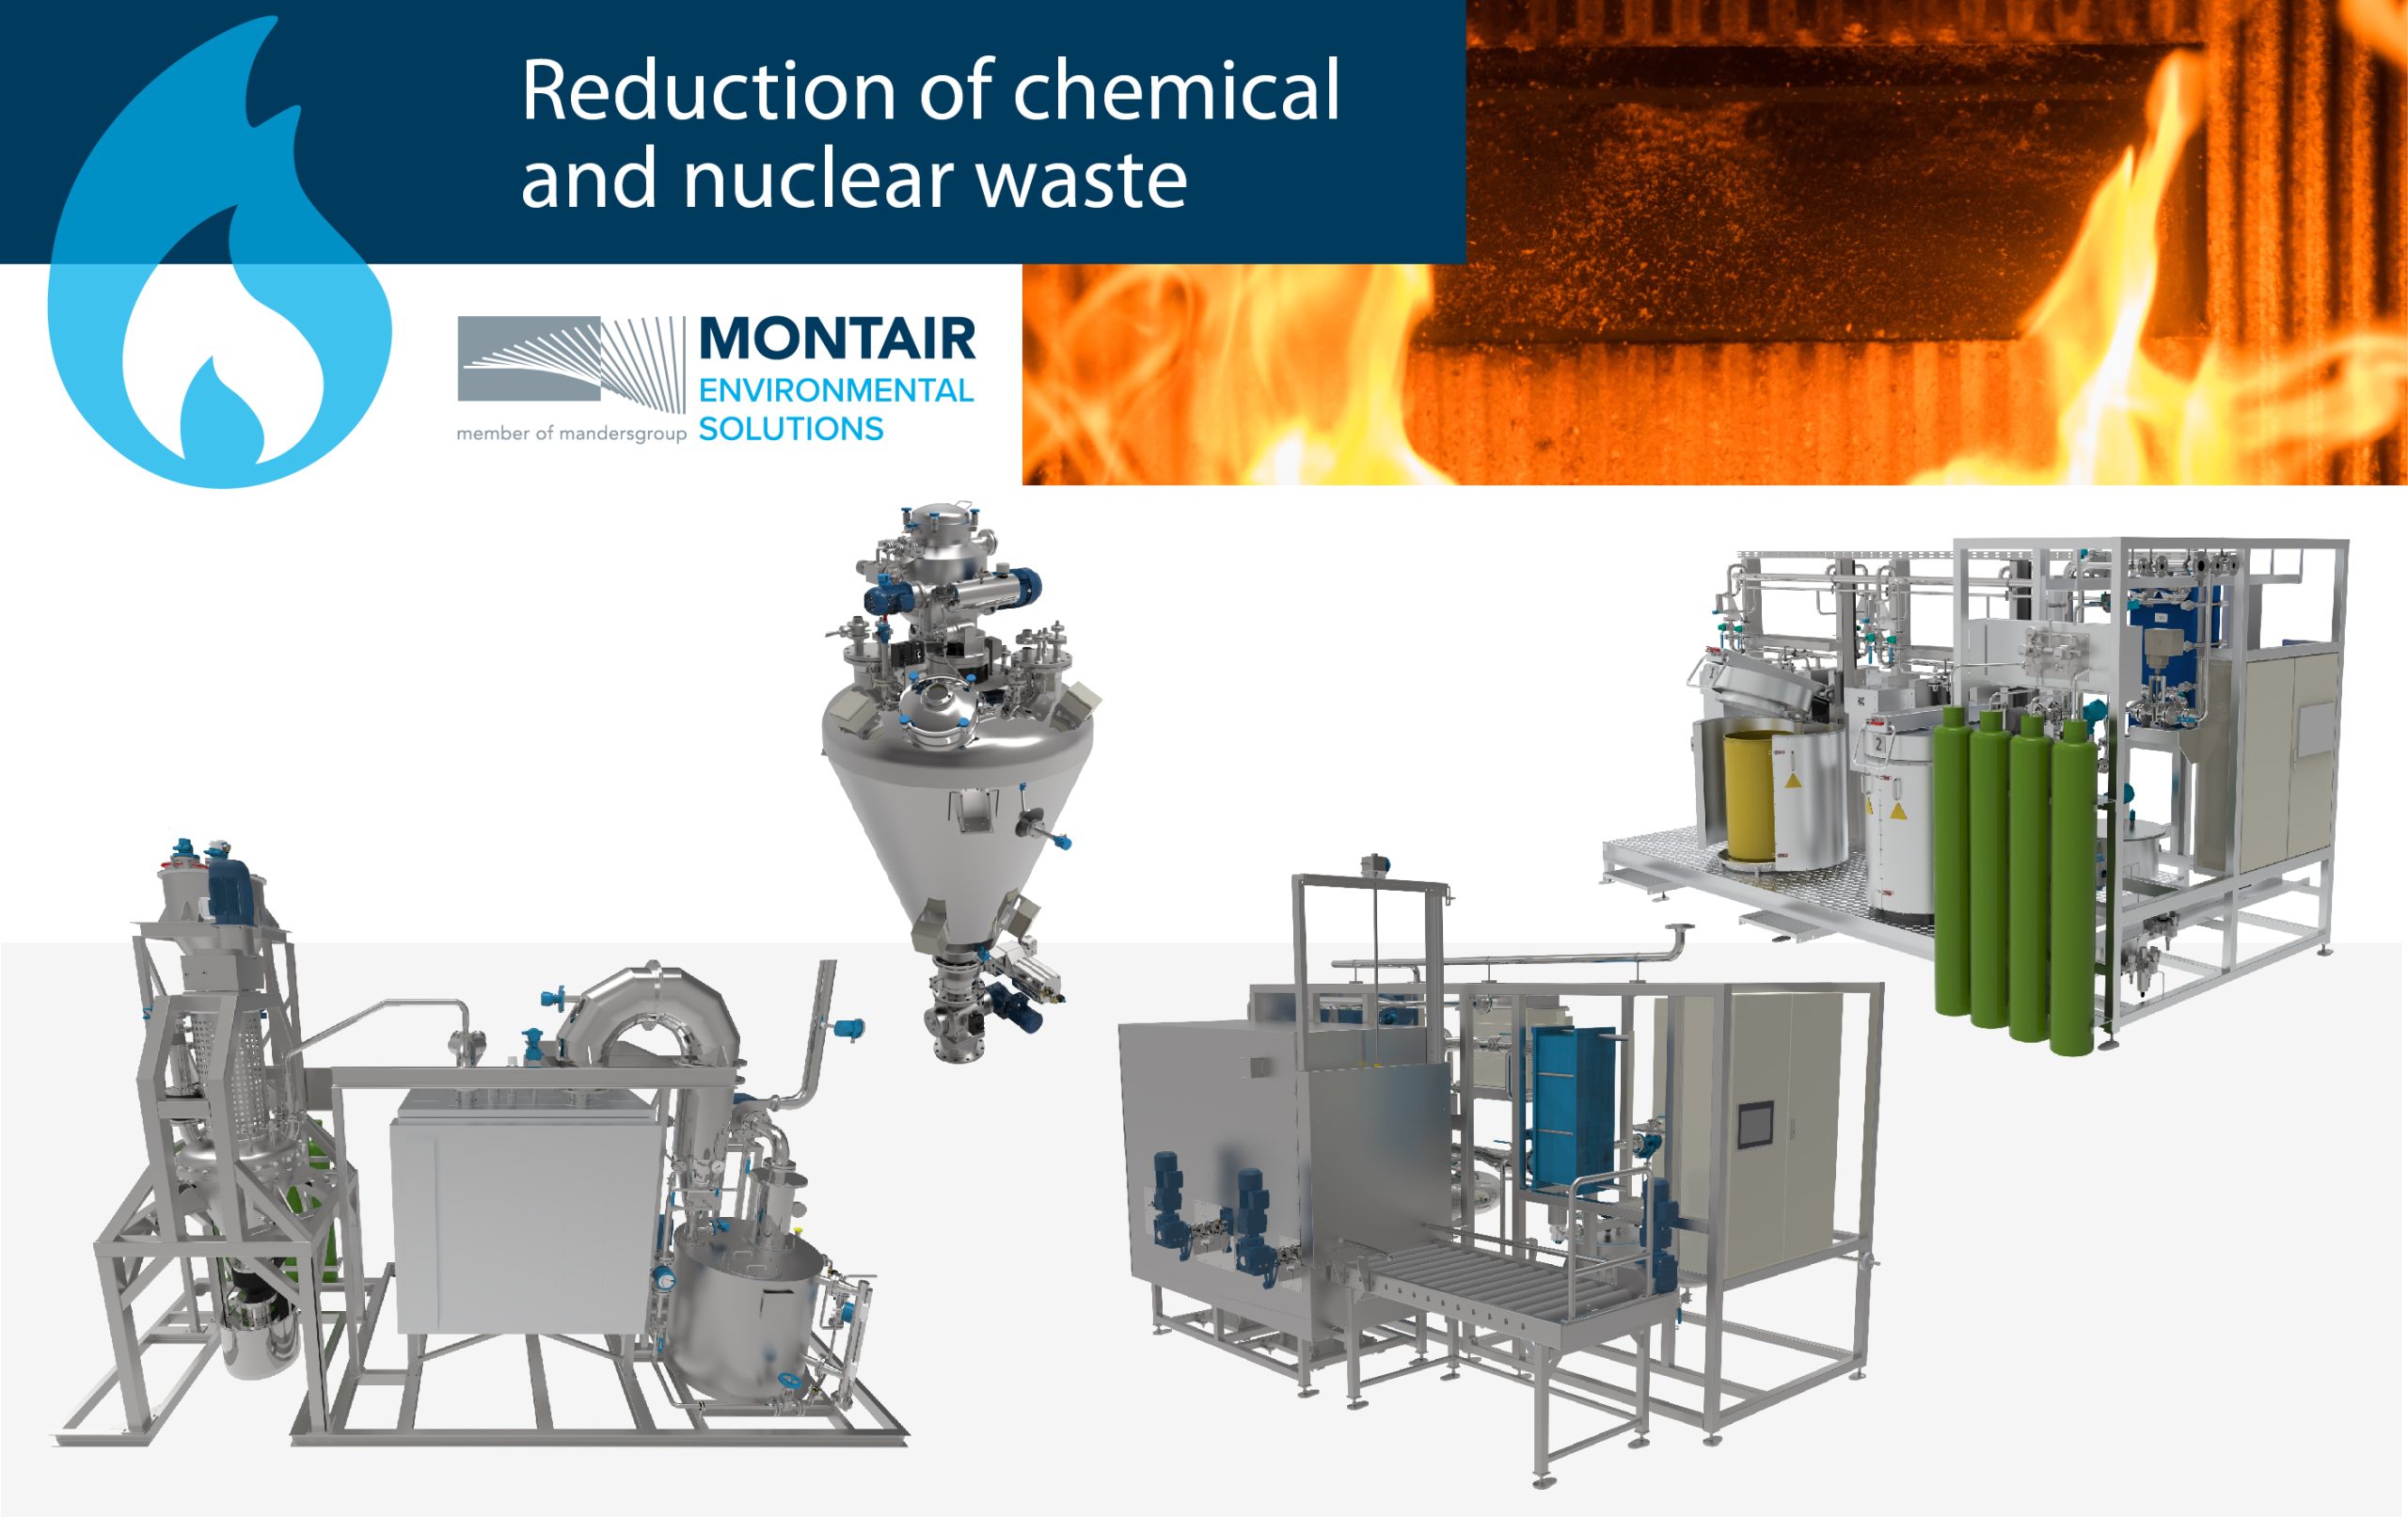 Montair Environmental Solutions - Reduction of chemical and nuclear waste